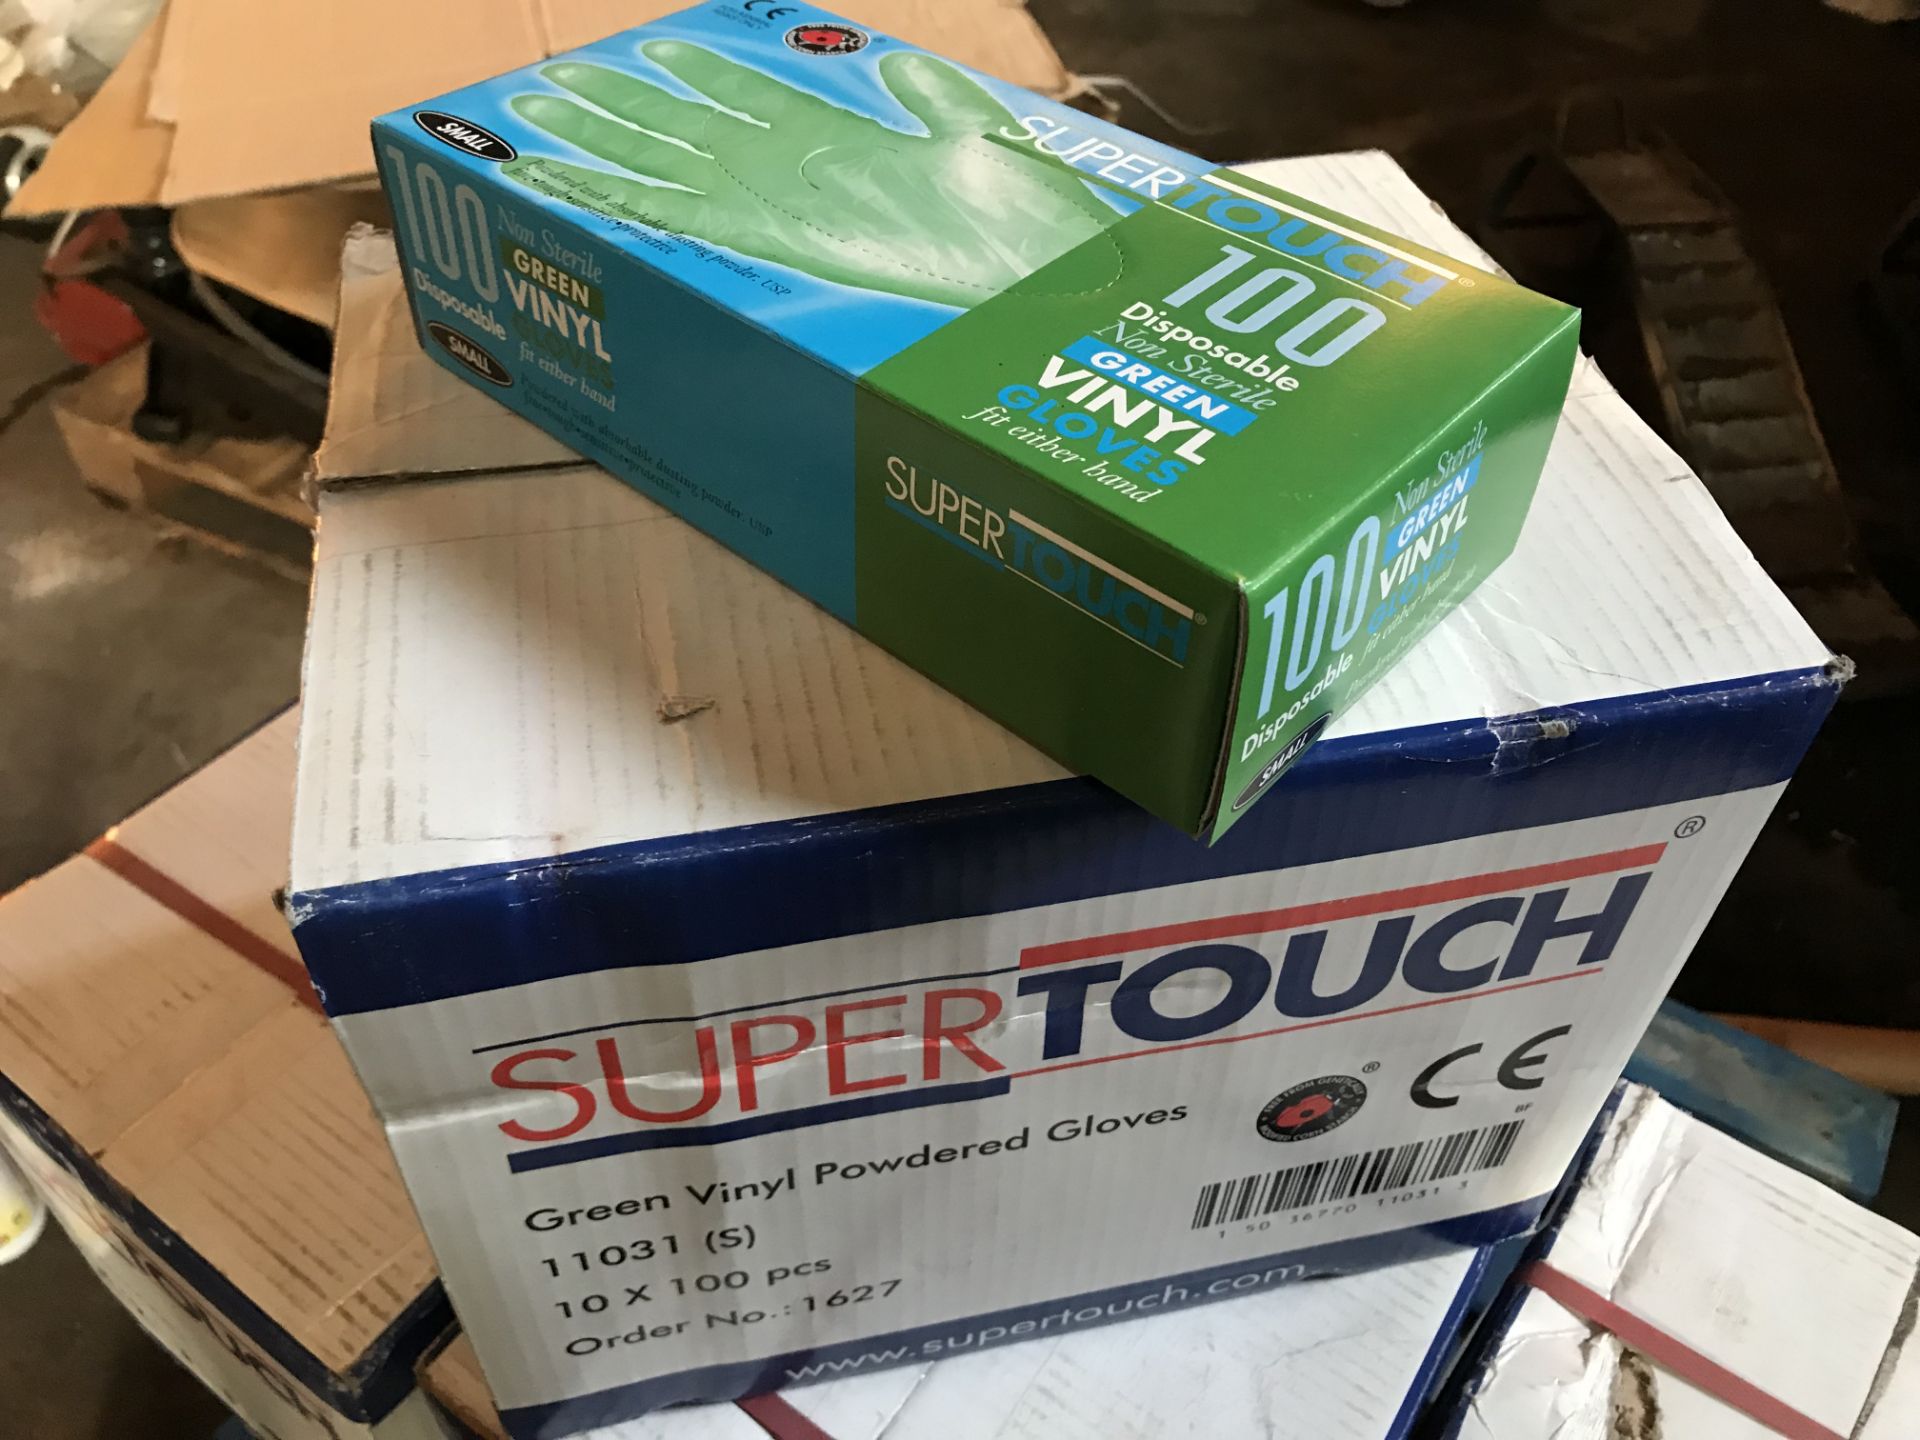 18,000 SUPERTOUCH POWDER FREE VINYL SMALL GLOVES - Image 5 of 5